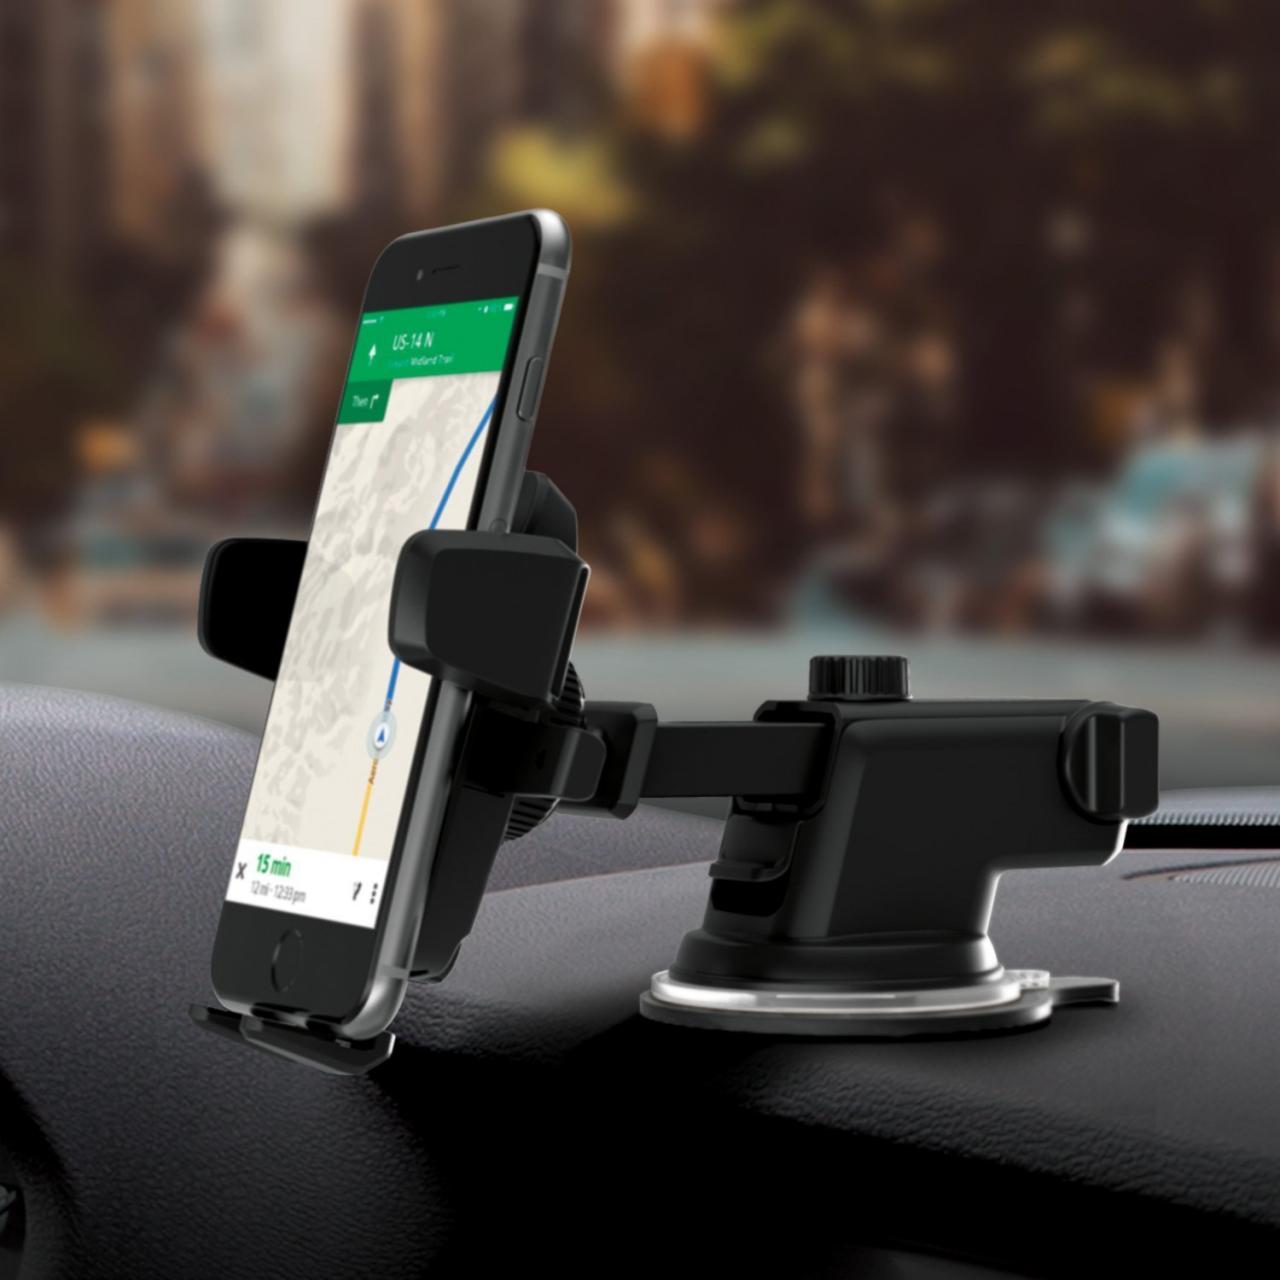 Top 10 Best Car Phone Mount/Holders for IPhone/Samsung 2018